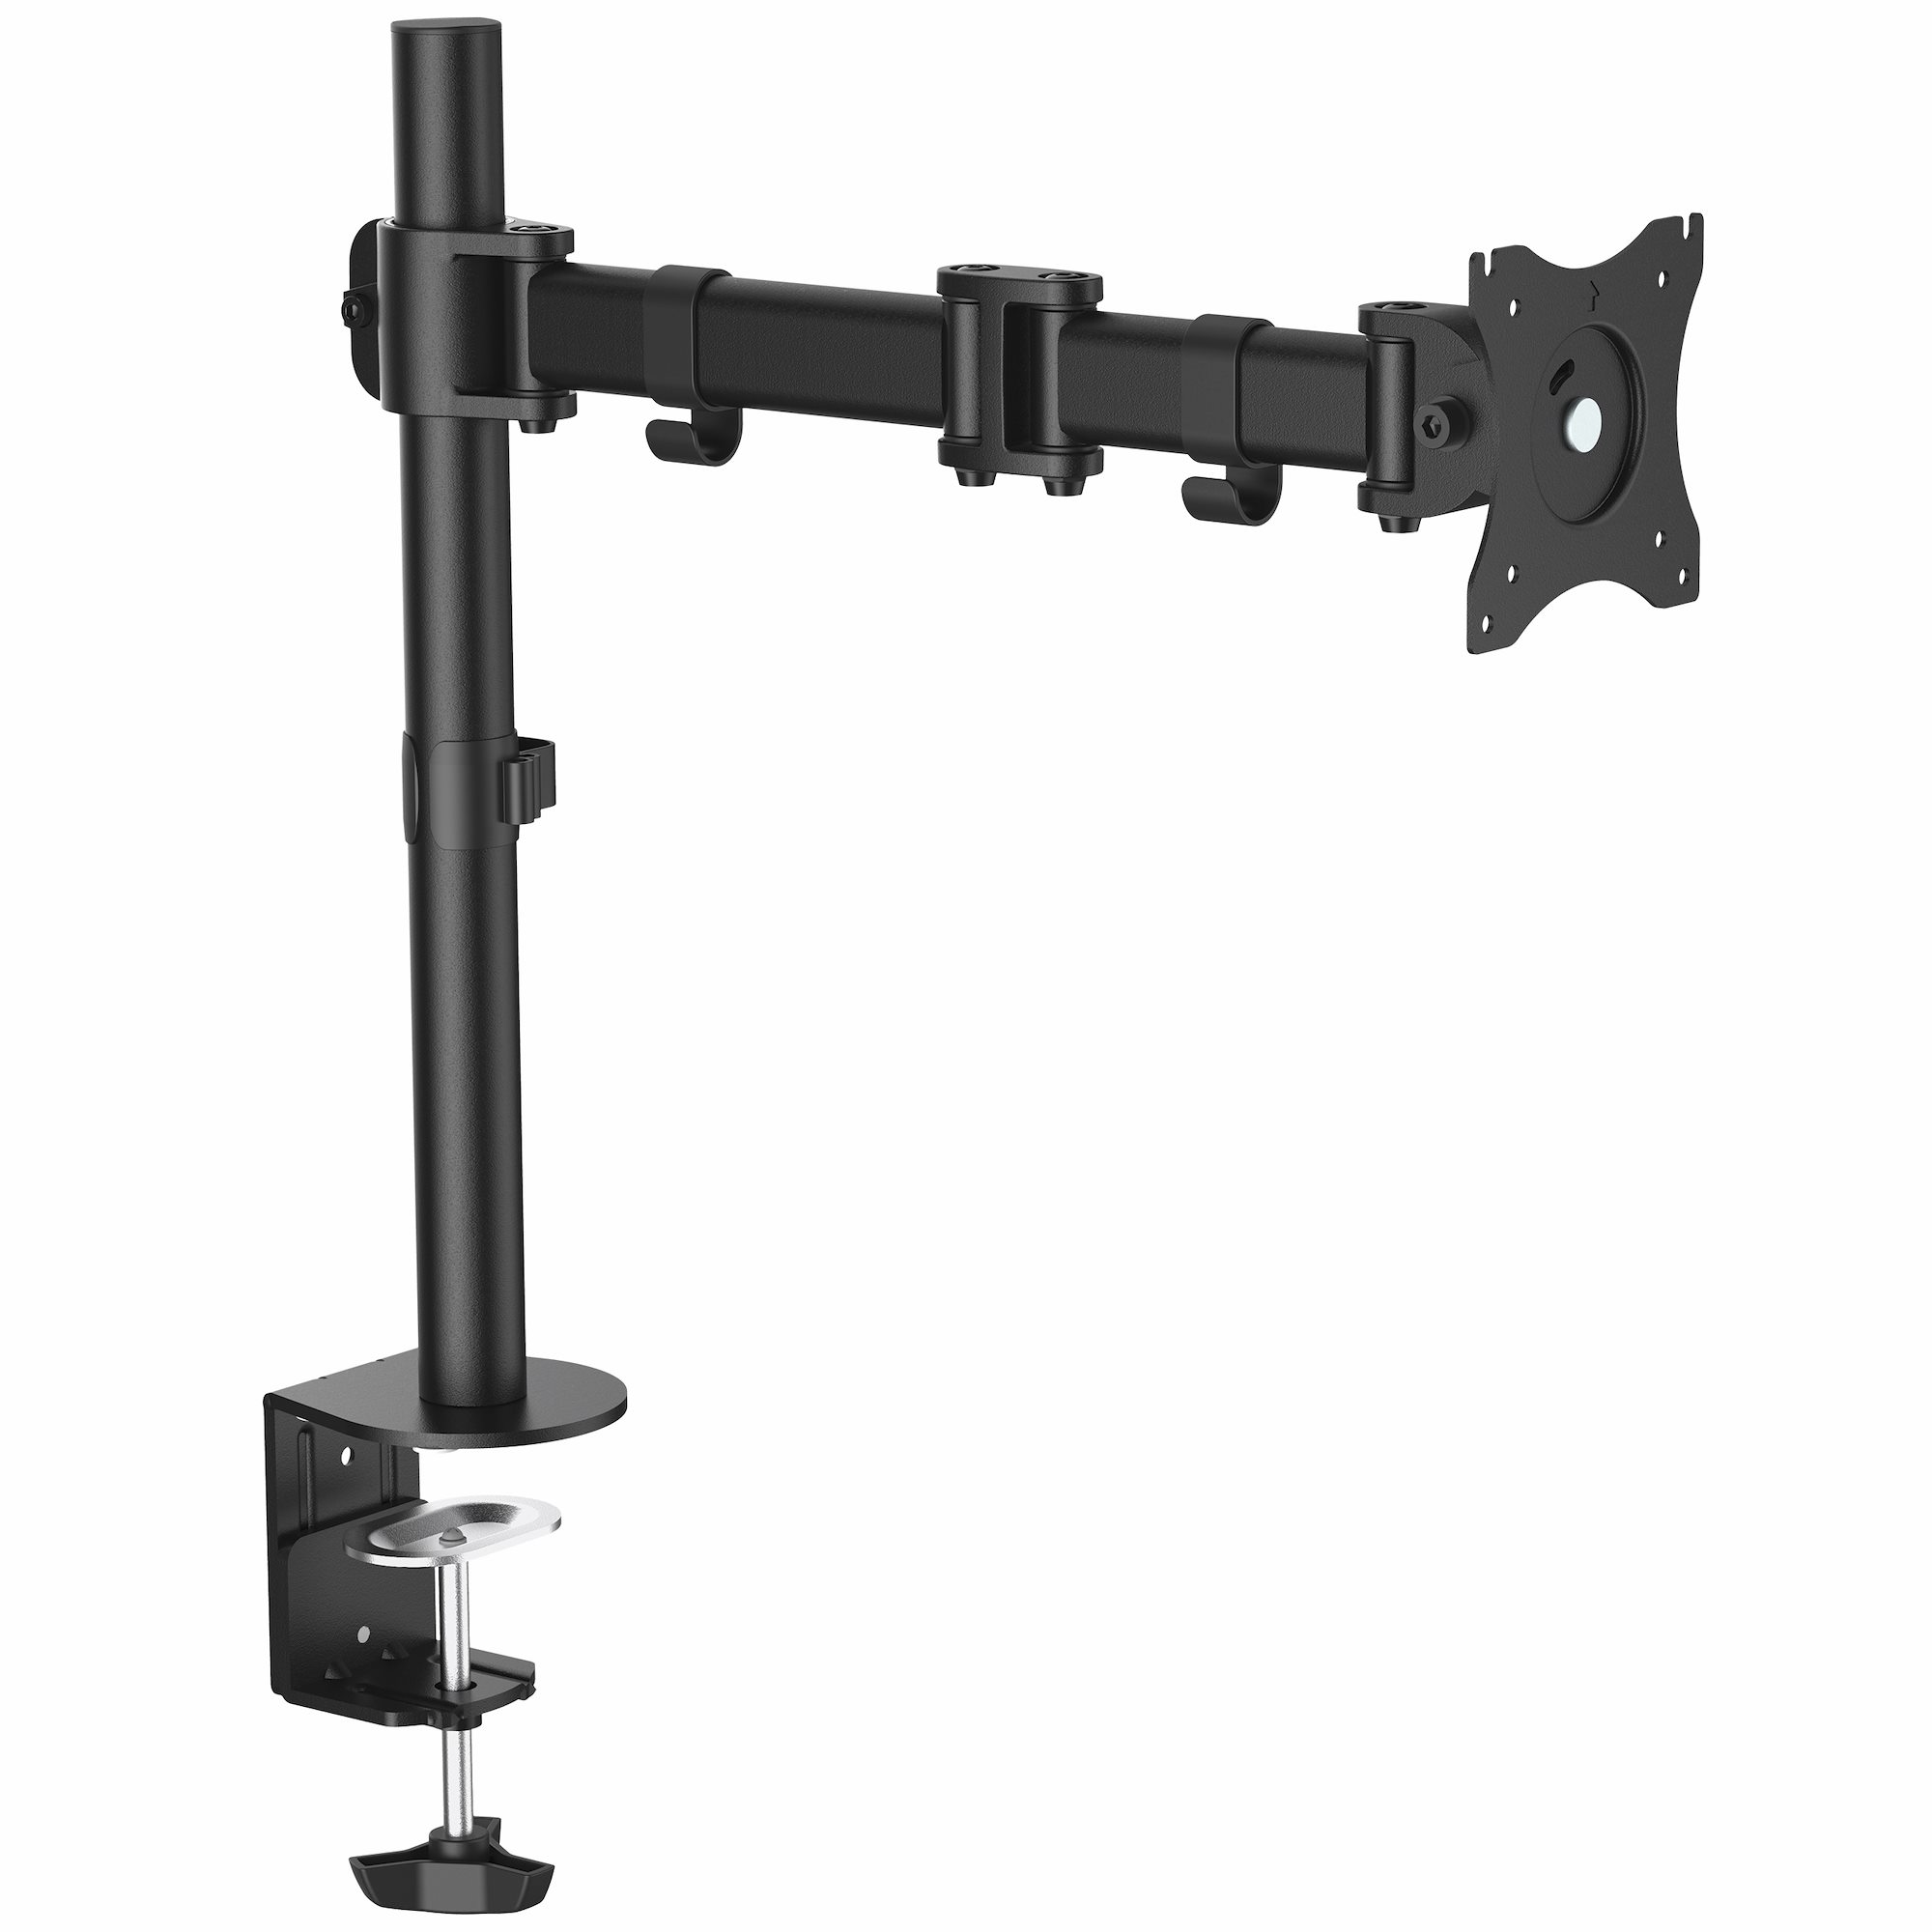 You Recently Viewed StarTech ARMPIVOTB Articulating Heavy Duty Monitor Desk Mount Arm Image